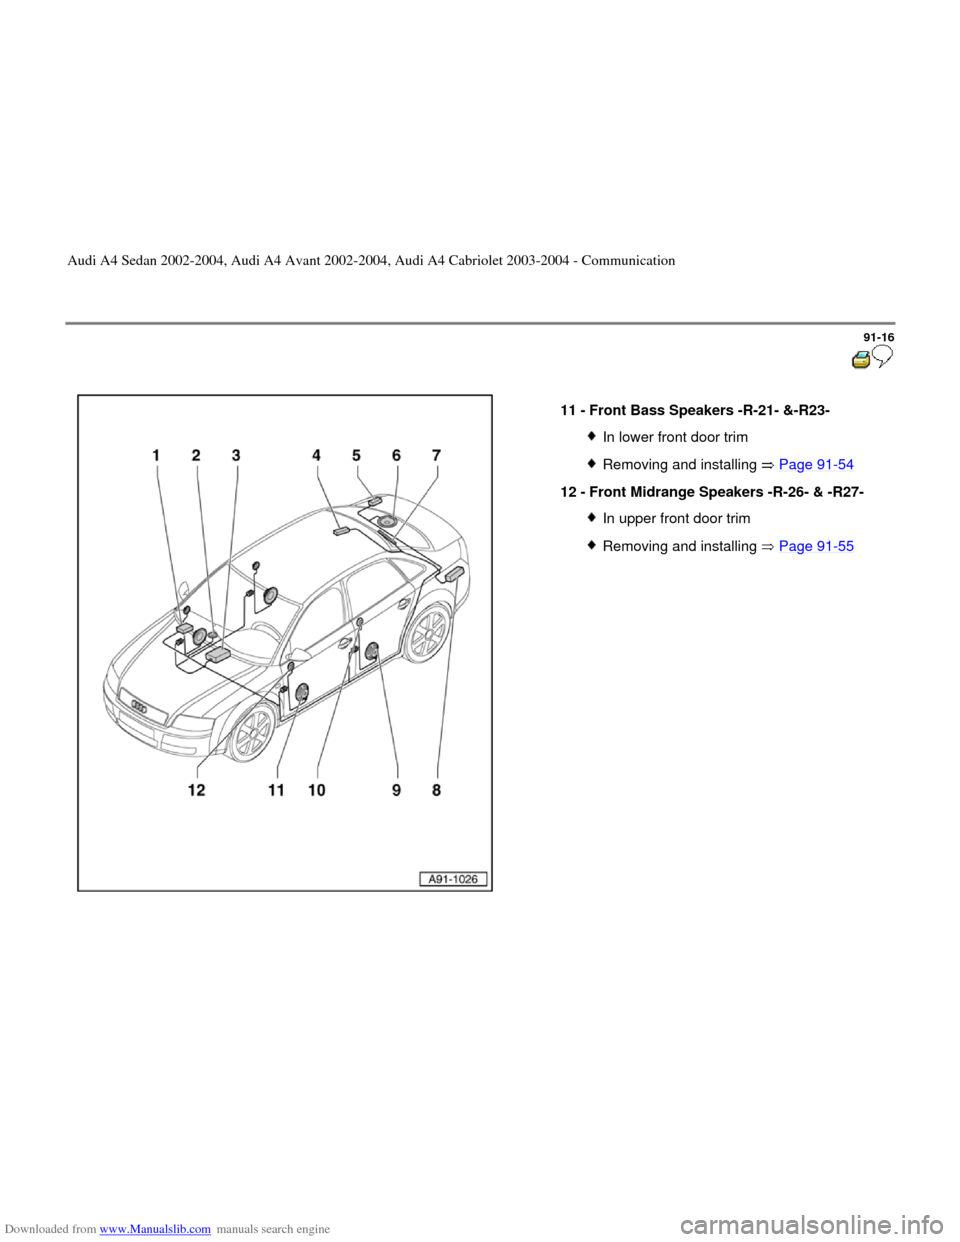 AUDI A4 2002 B5 / 1.G Radio System General Information Downloaded from www.Manualslib.com manuals search engine 91-16
 
  
11 - 
Front Bass Speakers -R-21- &-R23- 
In lower front door trimRemoving and installing   Page 91
-54
12 - 
Front Midrange Speakers